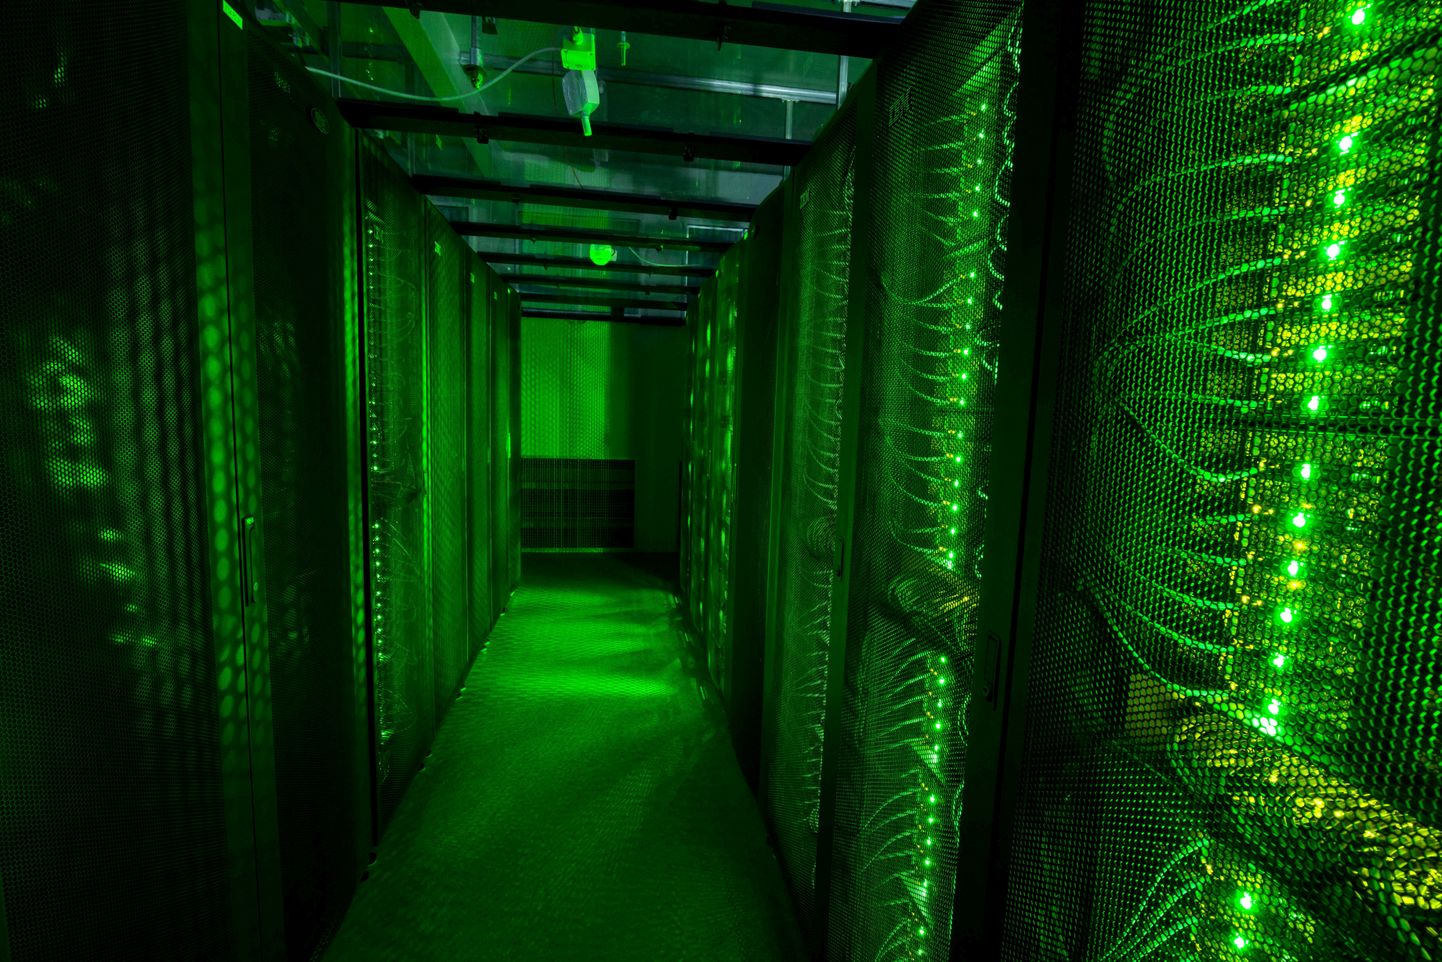 FILE PHOTO -  Servers for data storage are seen at Advania's Thor Data Center in Hafnarfjordur, Iceland August 7, 2015.   REUTERS/Sigtryggur Ari/File Photo